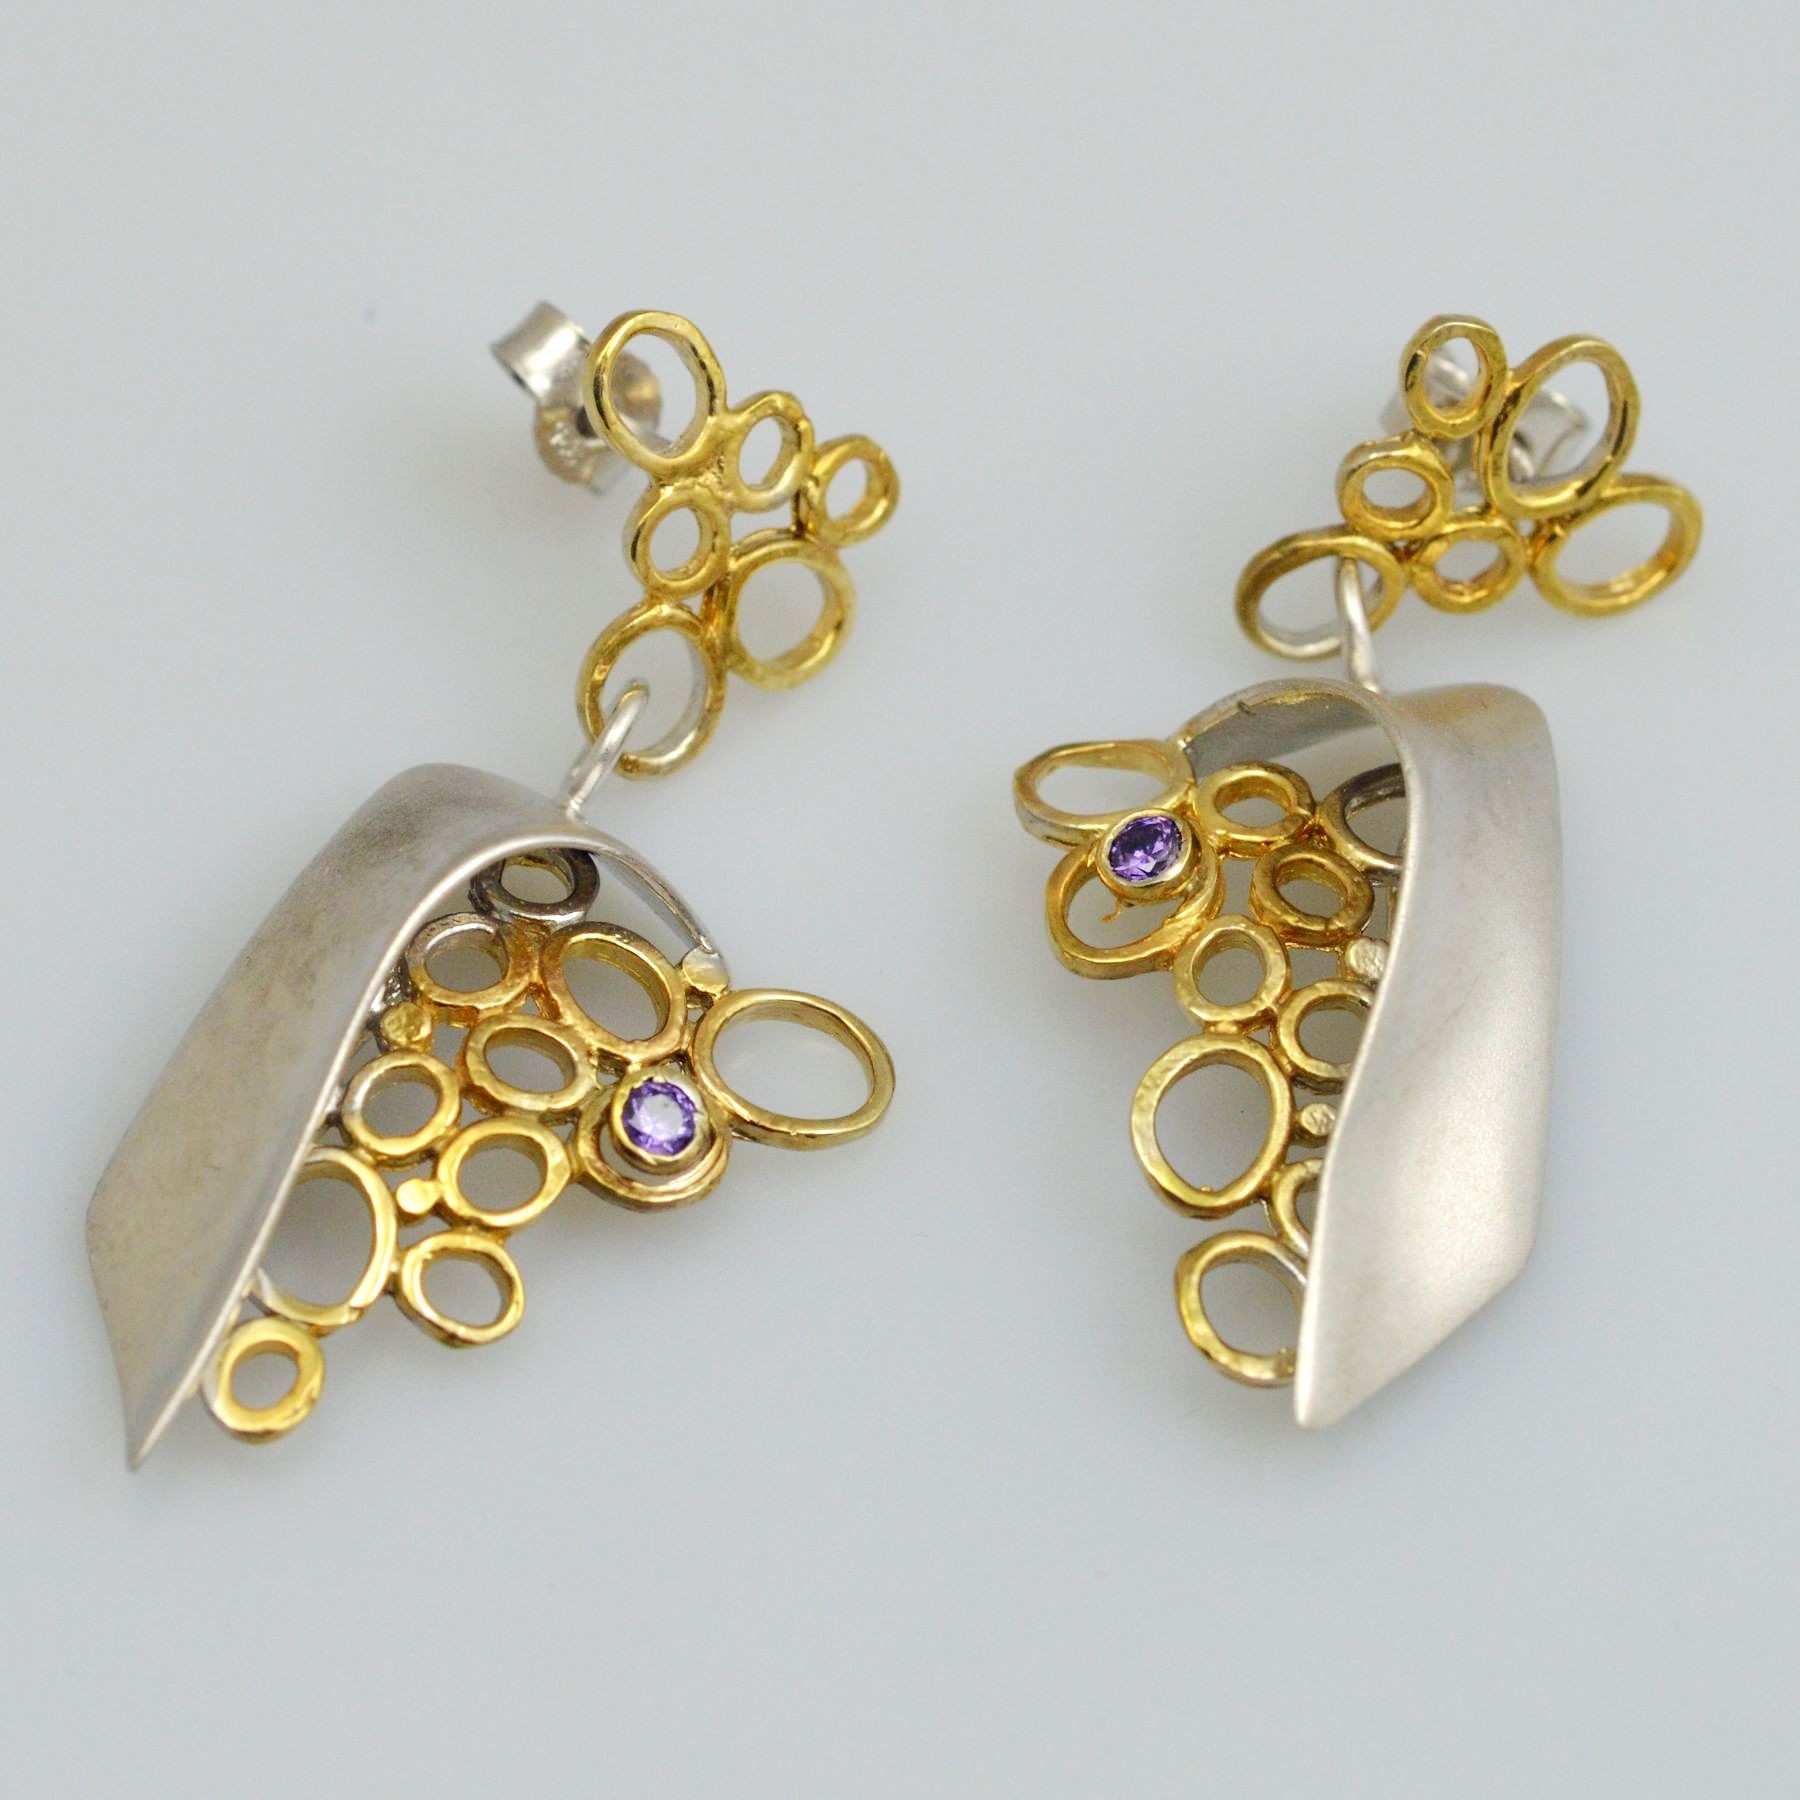 Silver earrings 925 rhodium and gold plated